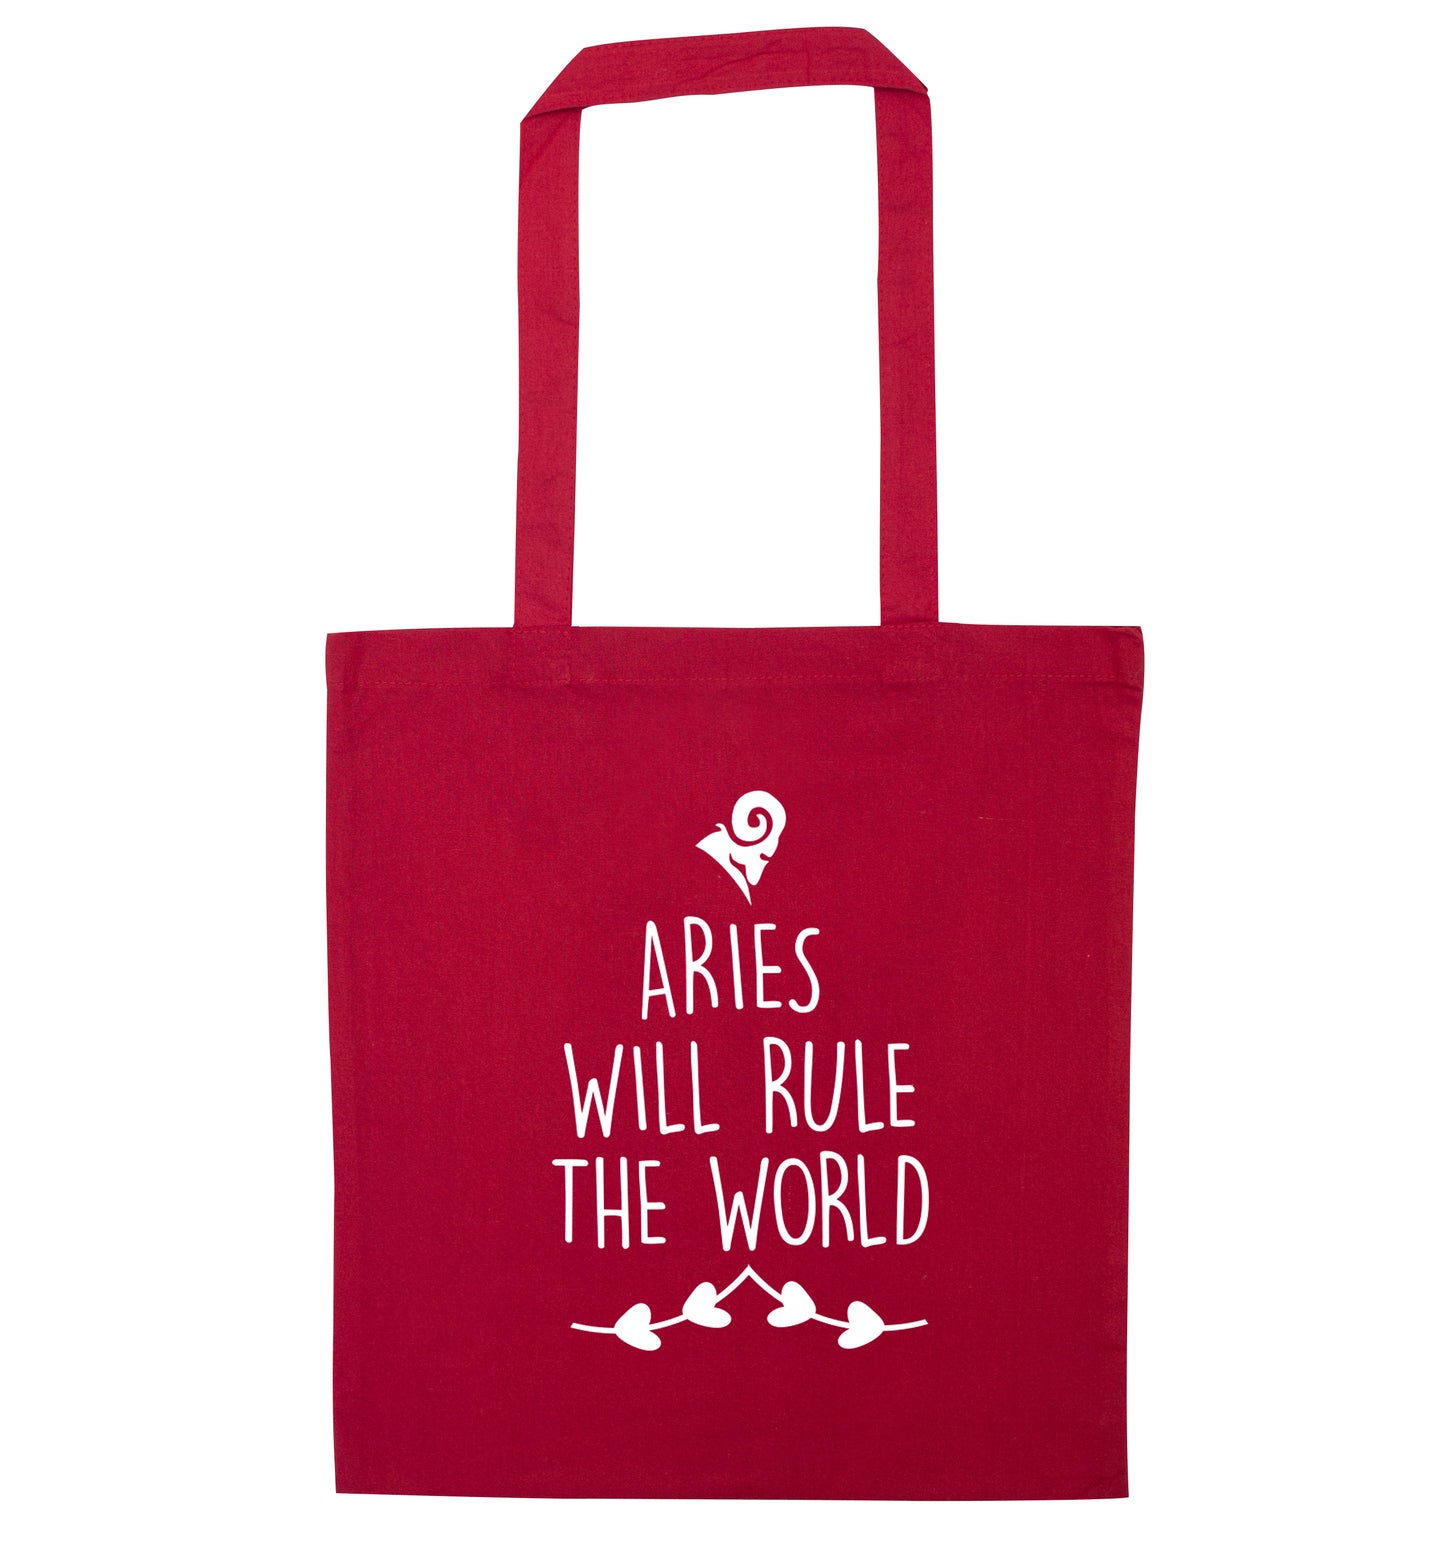 Aries will rule the world red tote bag